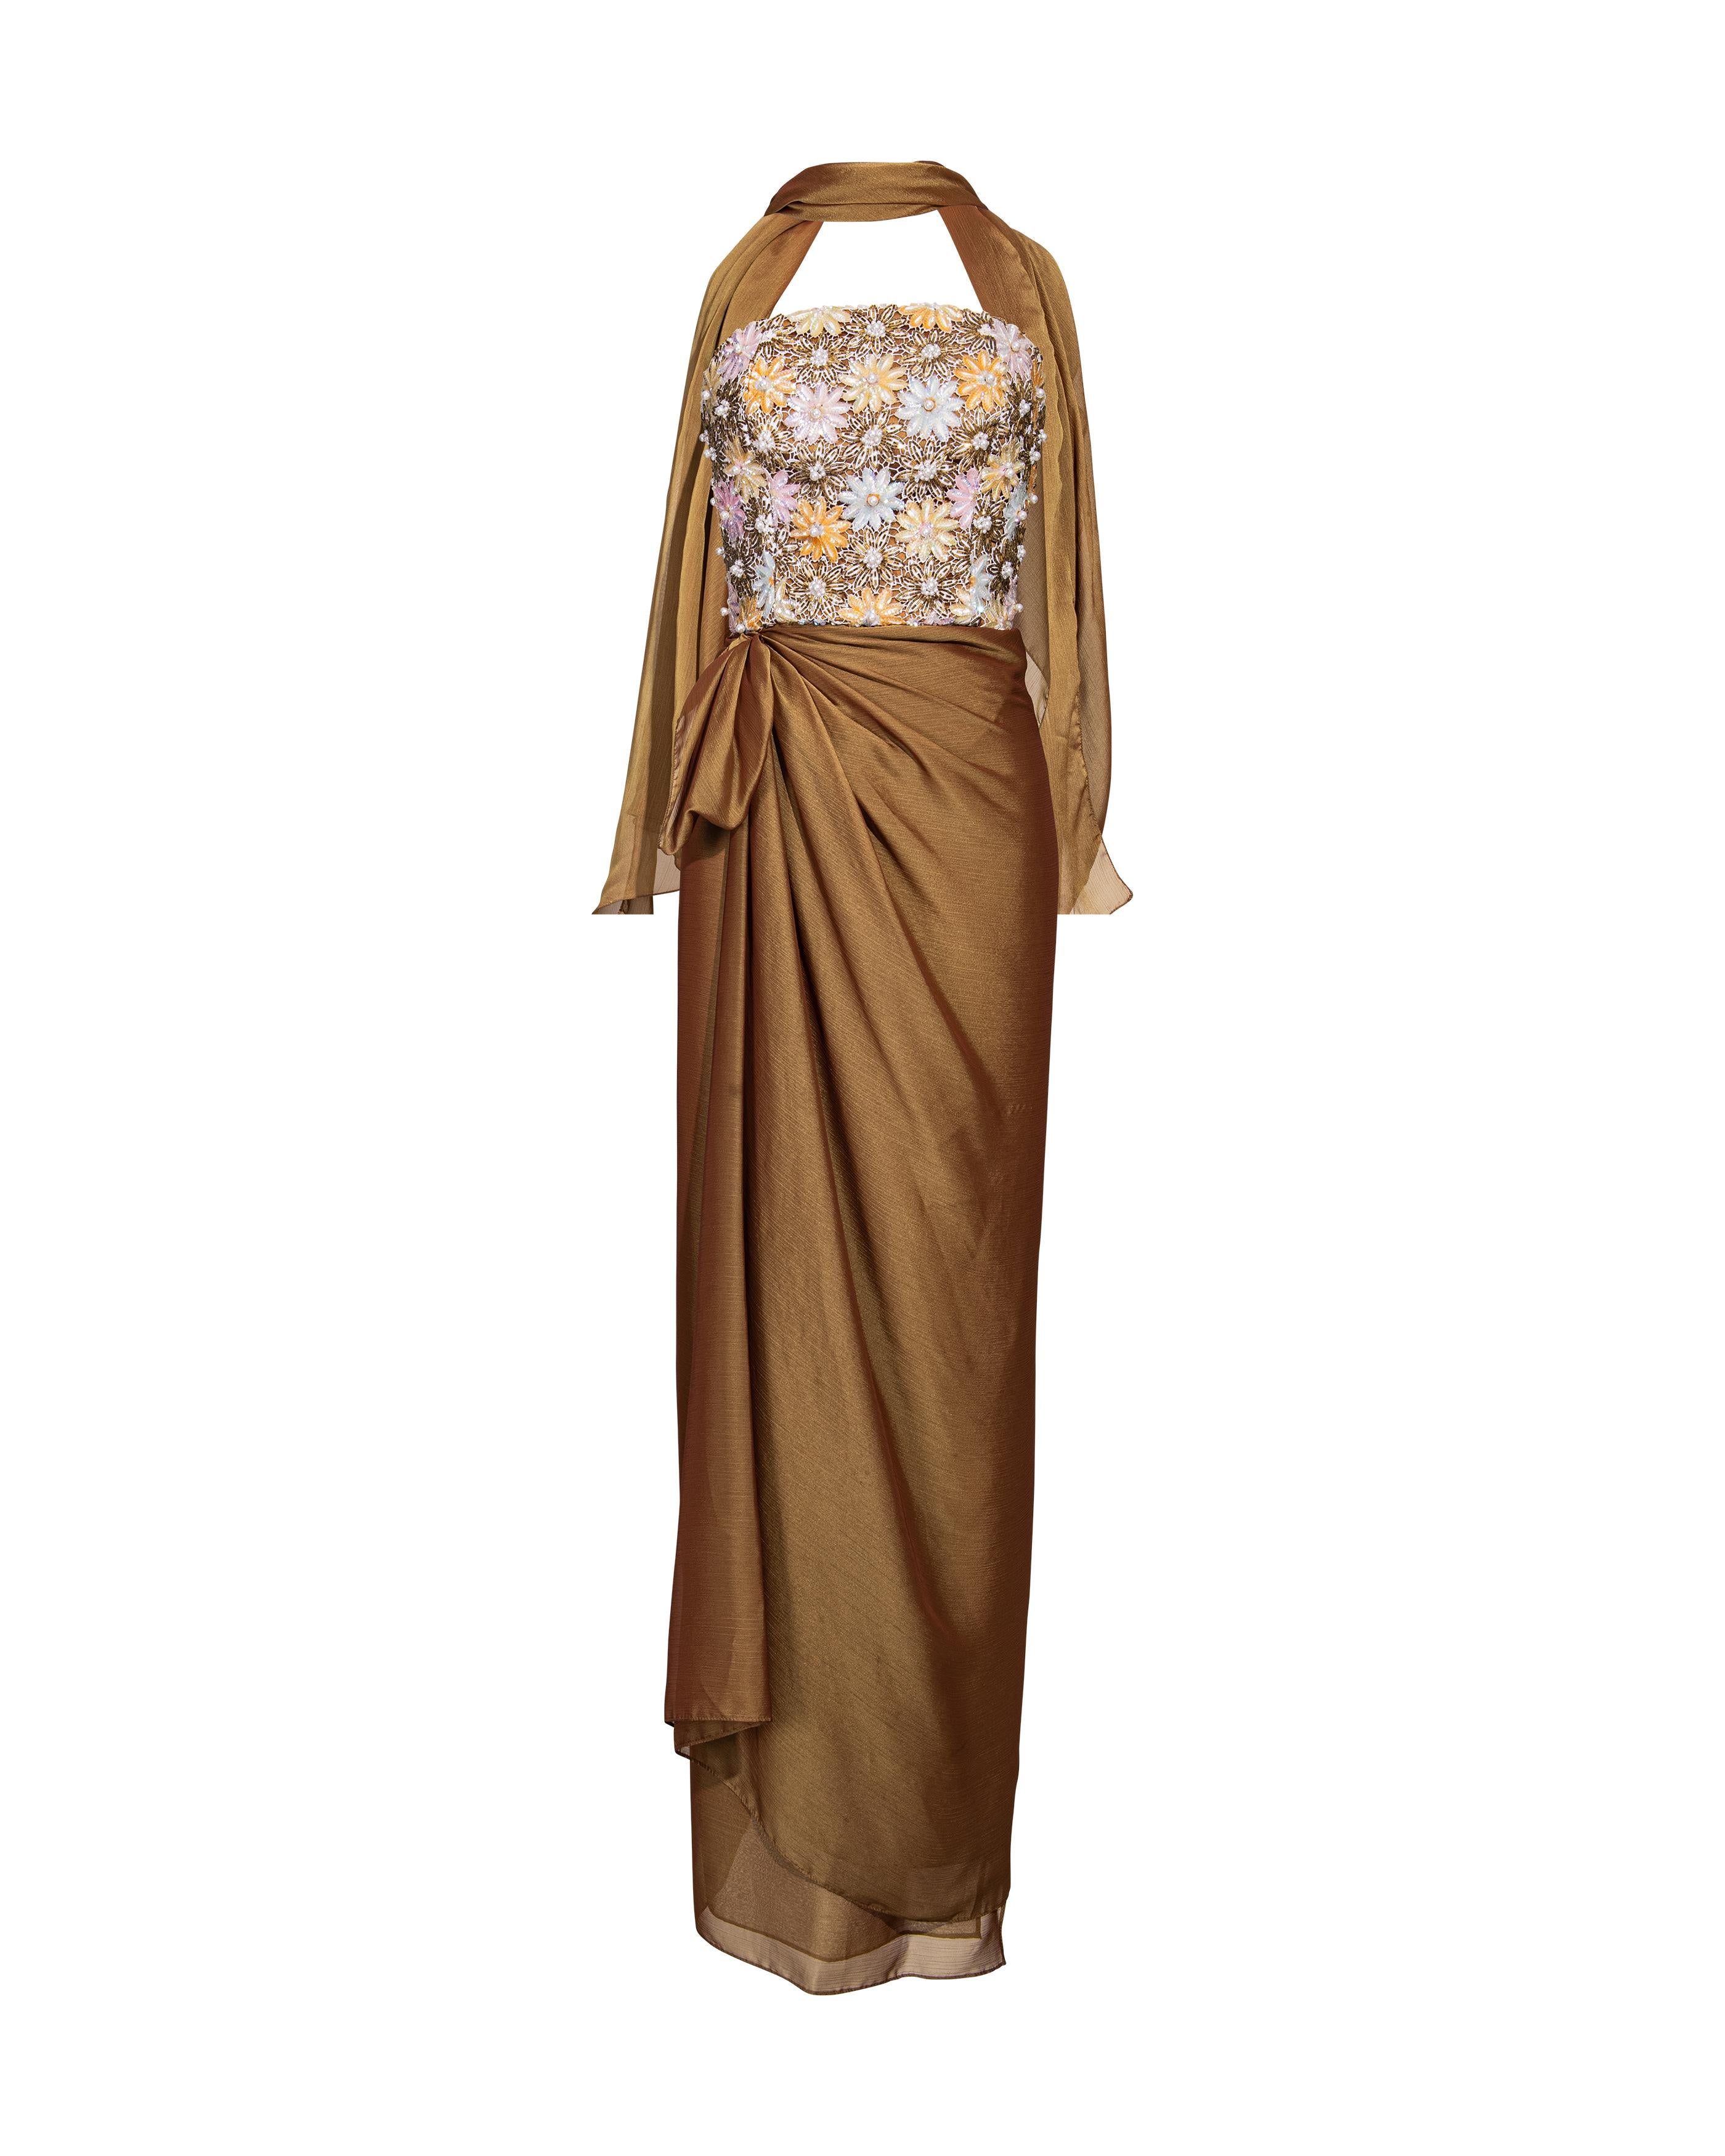 c. 1991 Nina Ricci Embellished Copper Strapless Gown with Stole In Good Condition For Sale In North Hollywood, CA